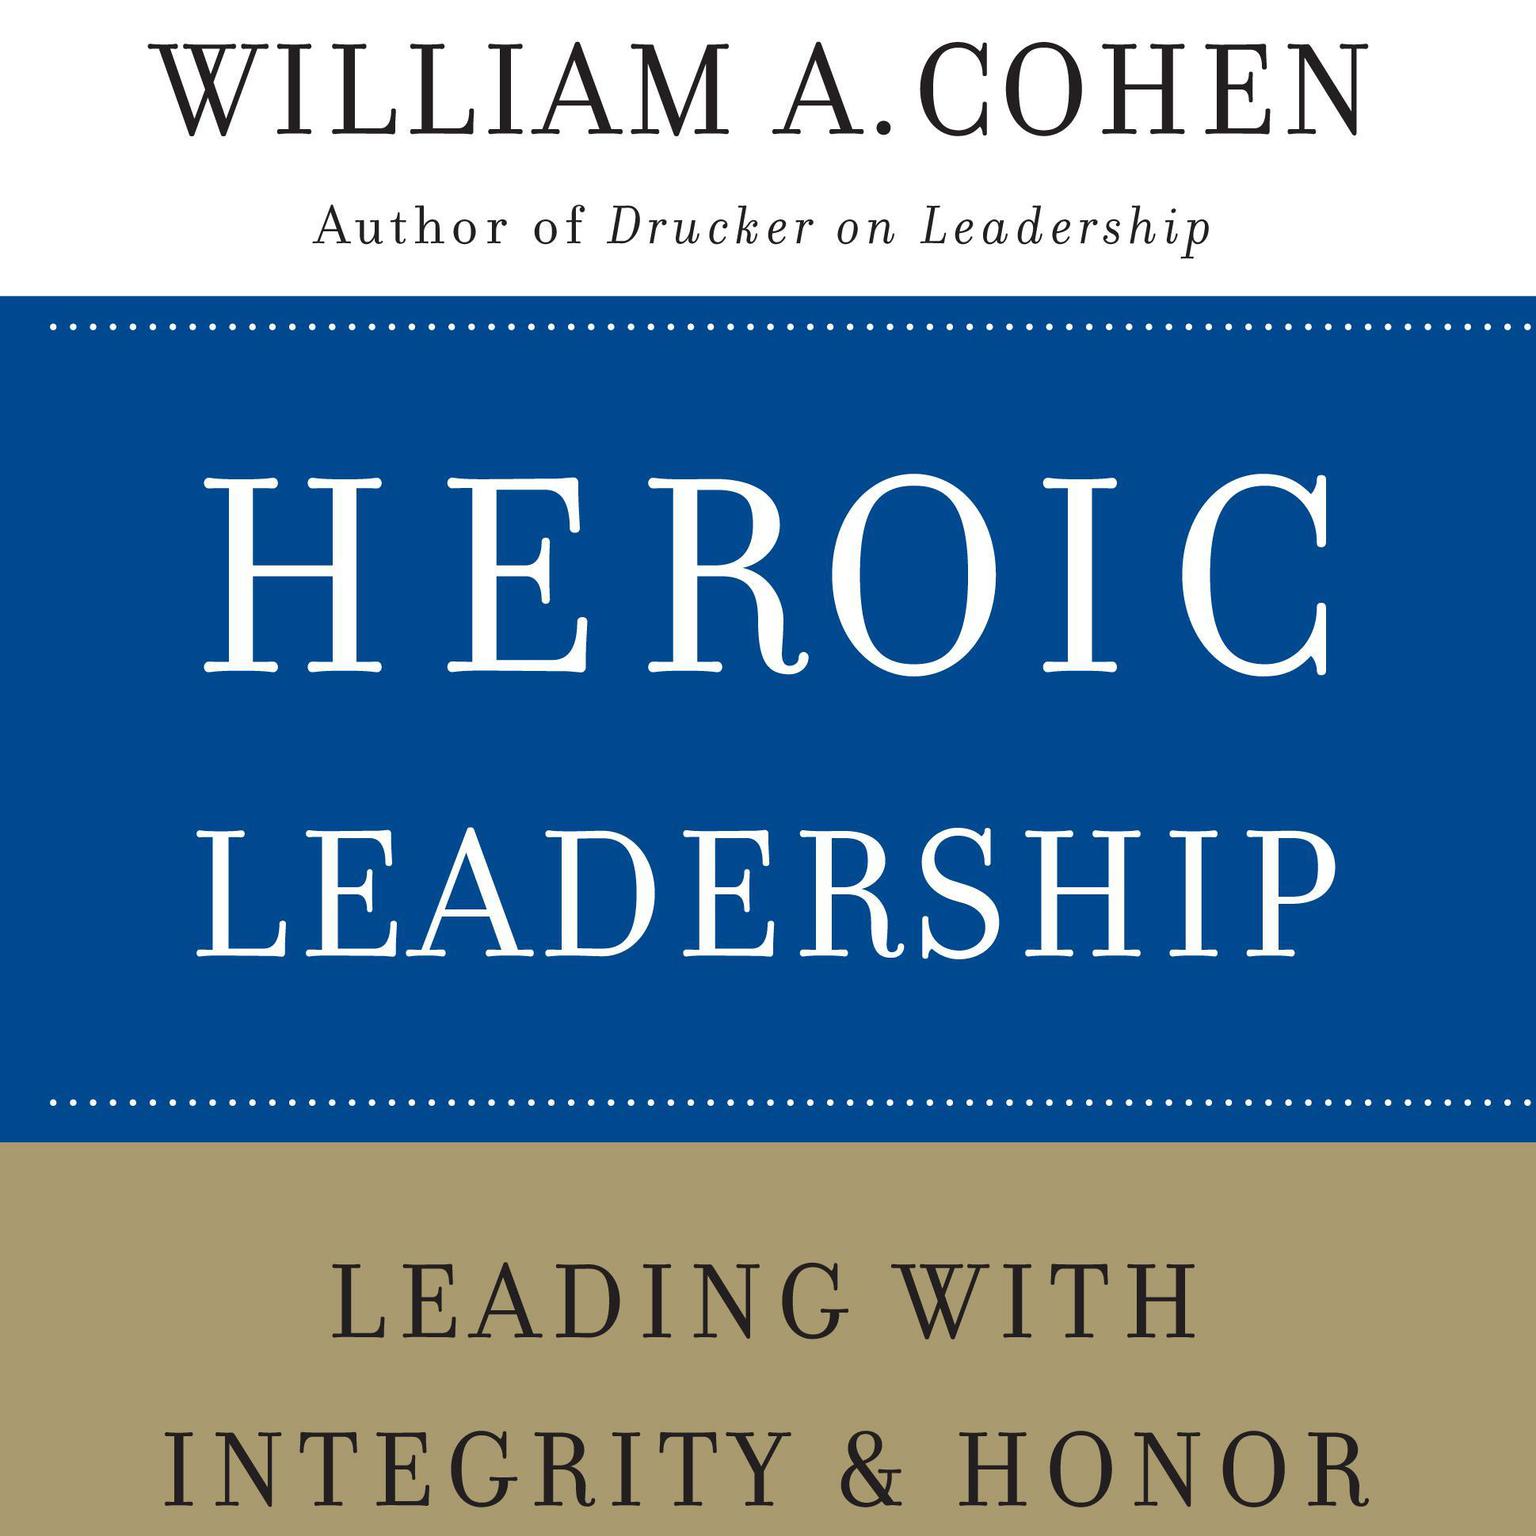 Heroic Leadership: Leading with Integrity and Honor Audiobook, by William A. Cohen